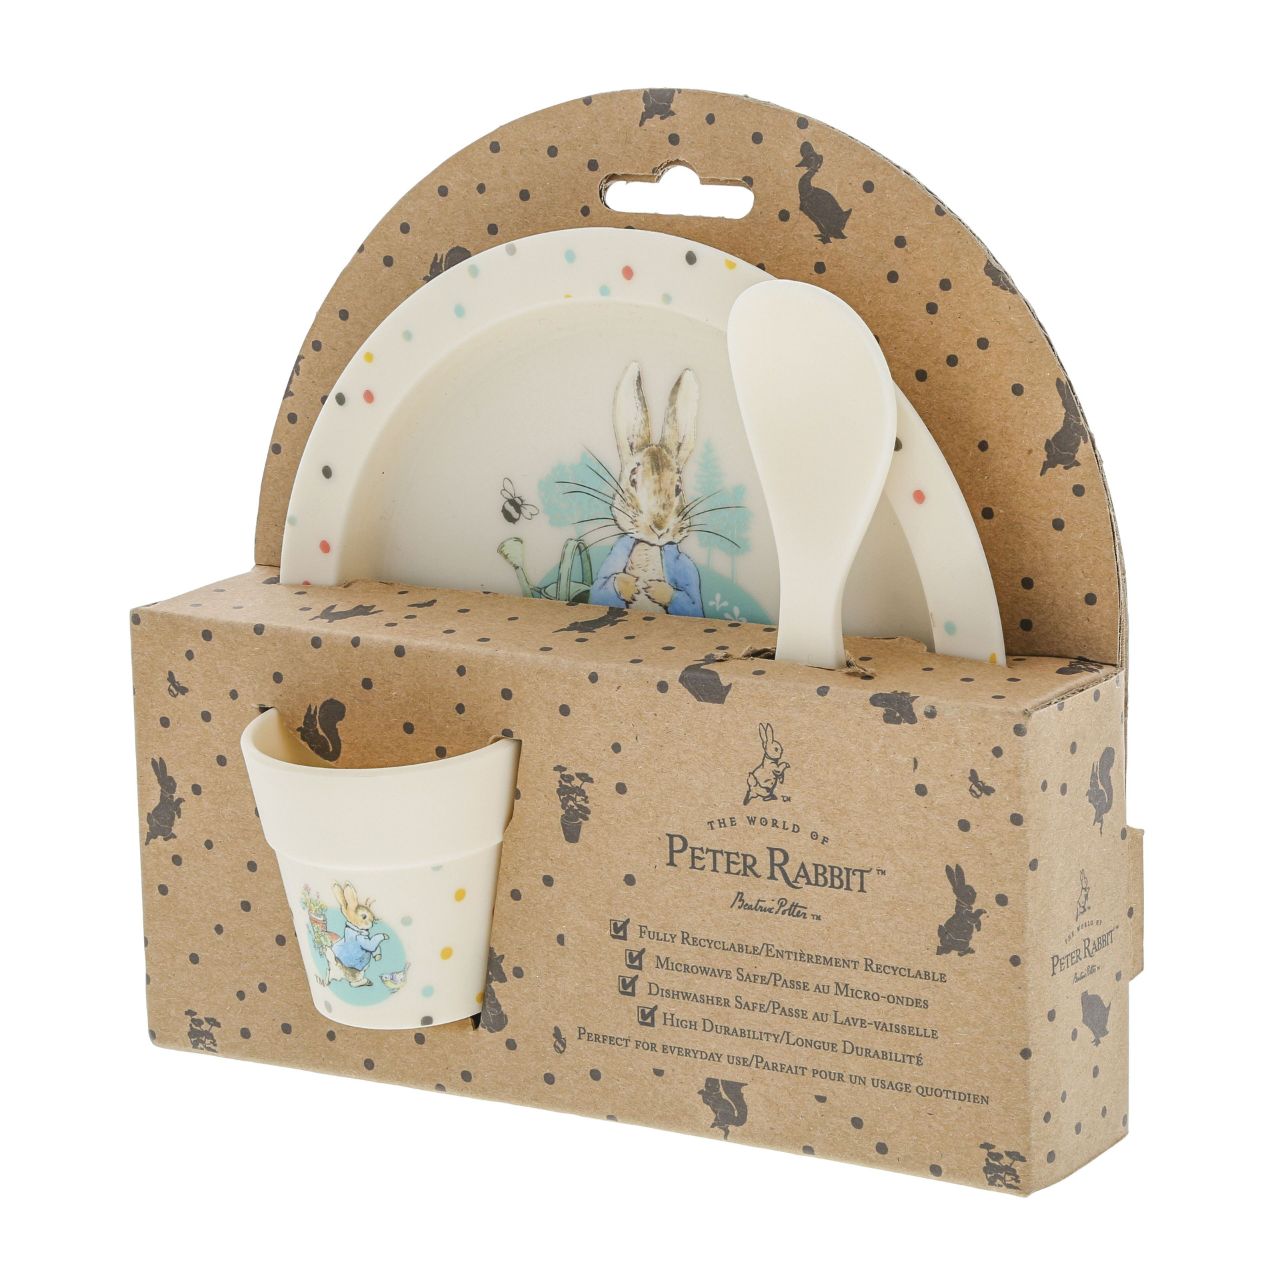 Peter Rabbit Egg Cup Set  Introducing this brand new at home with Peter Rabbit collection. There's nothing quite like a fun Peter Rabbit motif to entice those little tummies to clear their plates. Make mealtimes fun and practical with this egg cup set. Highly durable and can be used at home, in the garden, or on the go.